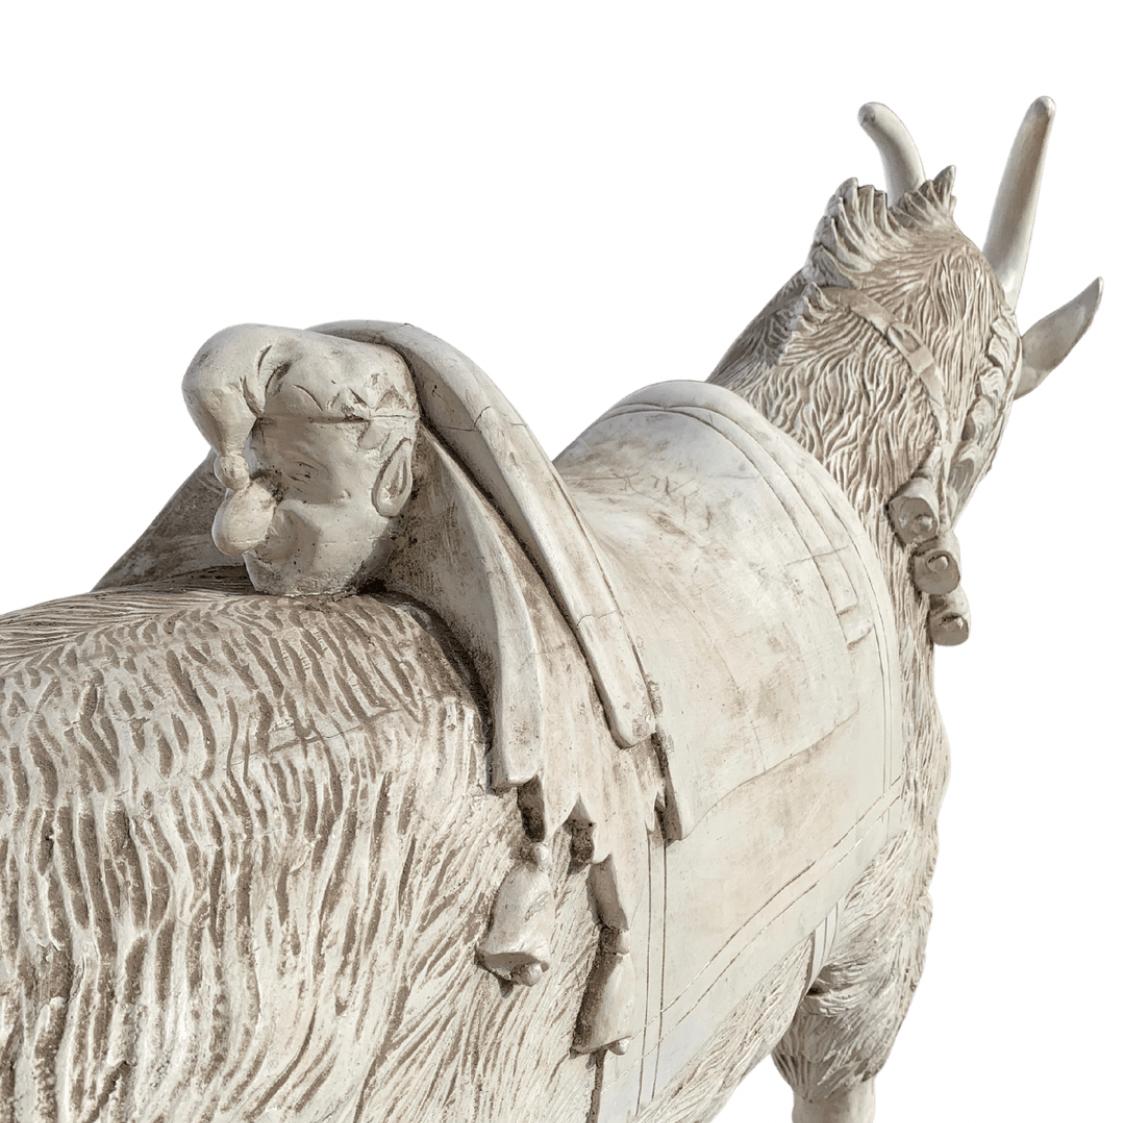 Full size wooden carousel goat in the style of Daniel Charles Muller.
Punchinello carved into the back of the saddle.
Punch was one of the turn of the century’s most popular characters known to most children.
D C Muller Brothers were Carousel